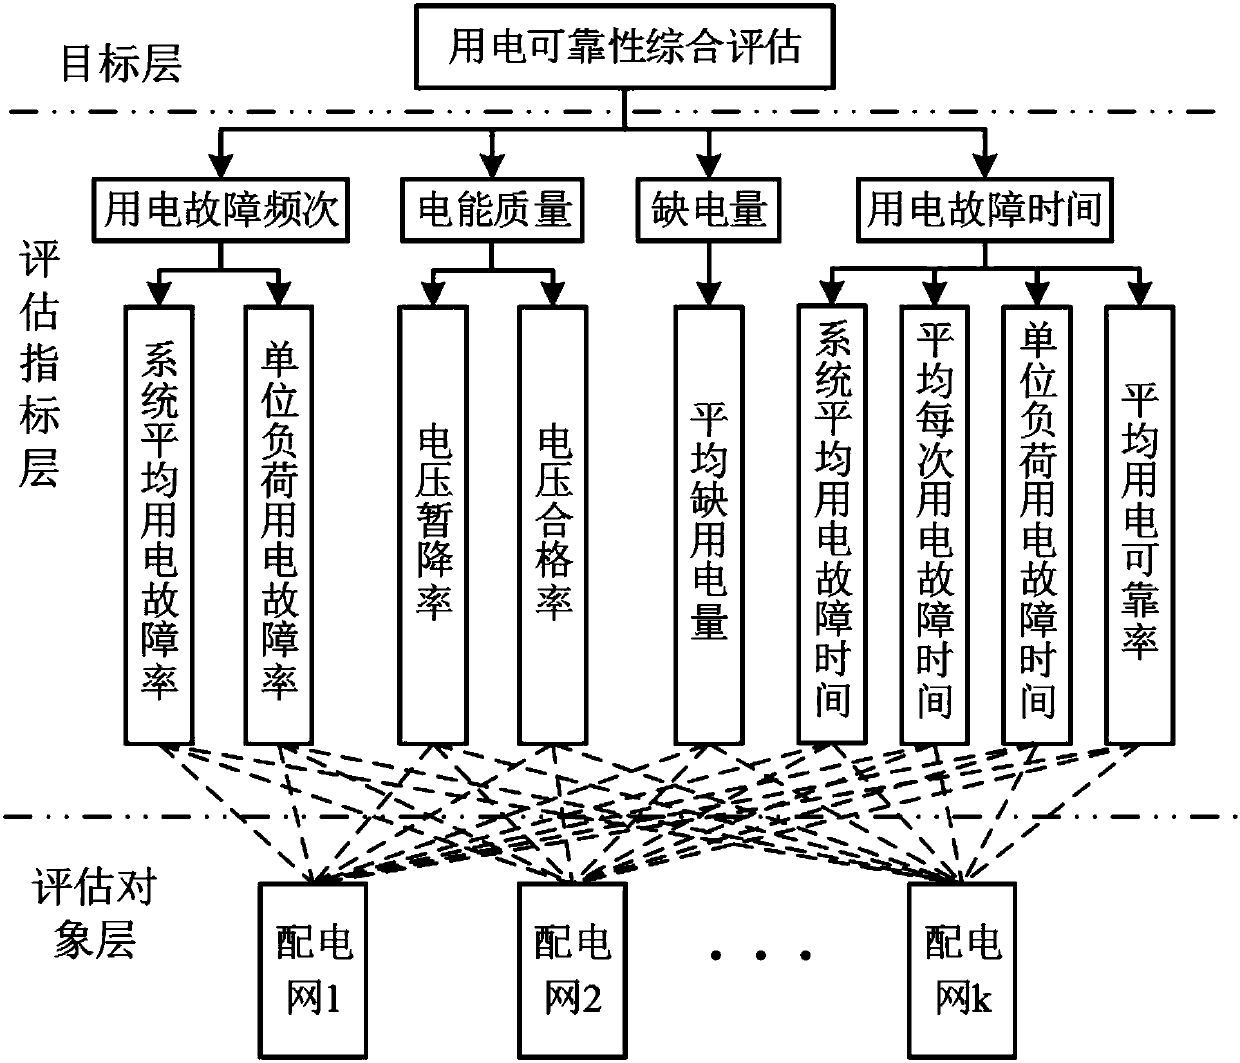 Power distribution network reliability evaluation method based on AHP and entropy weight method